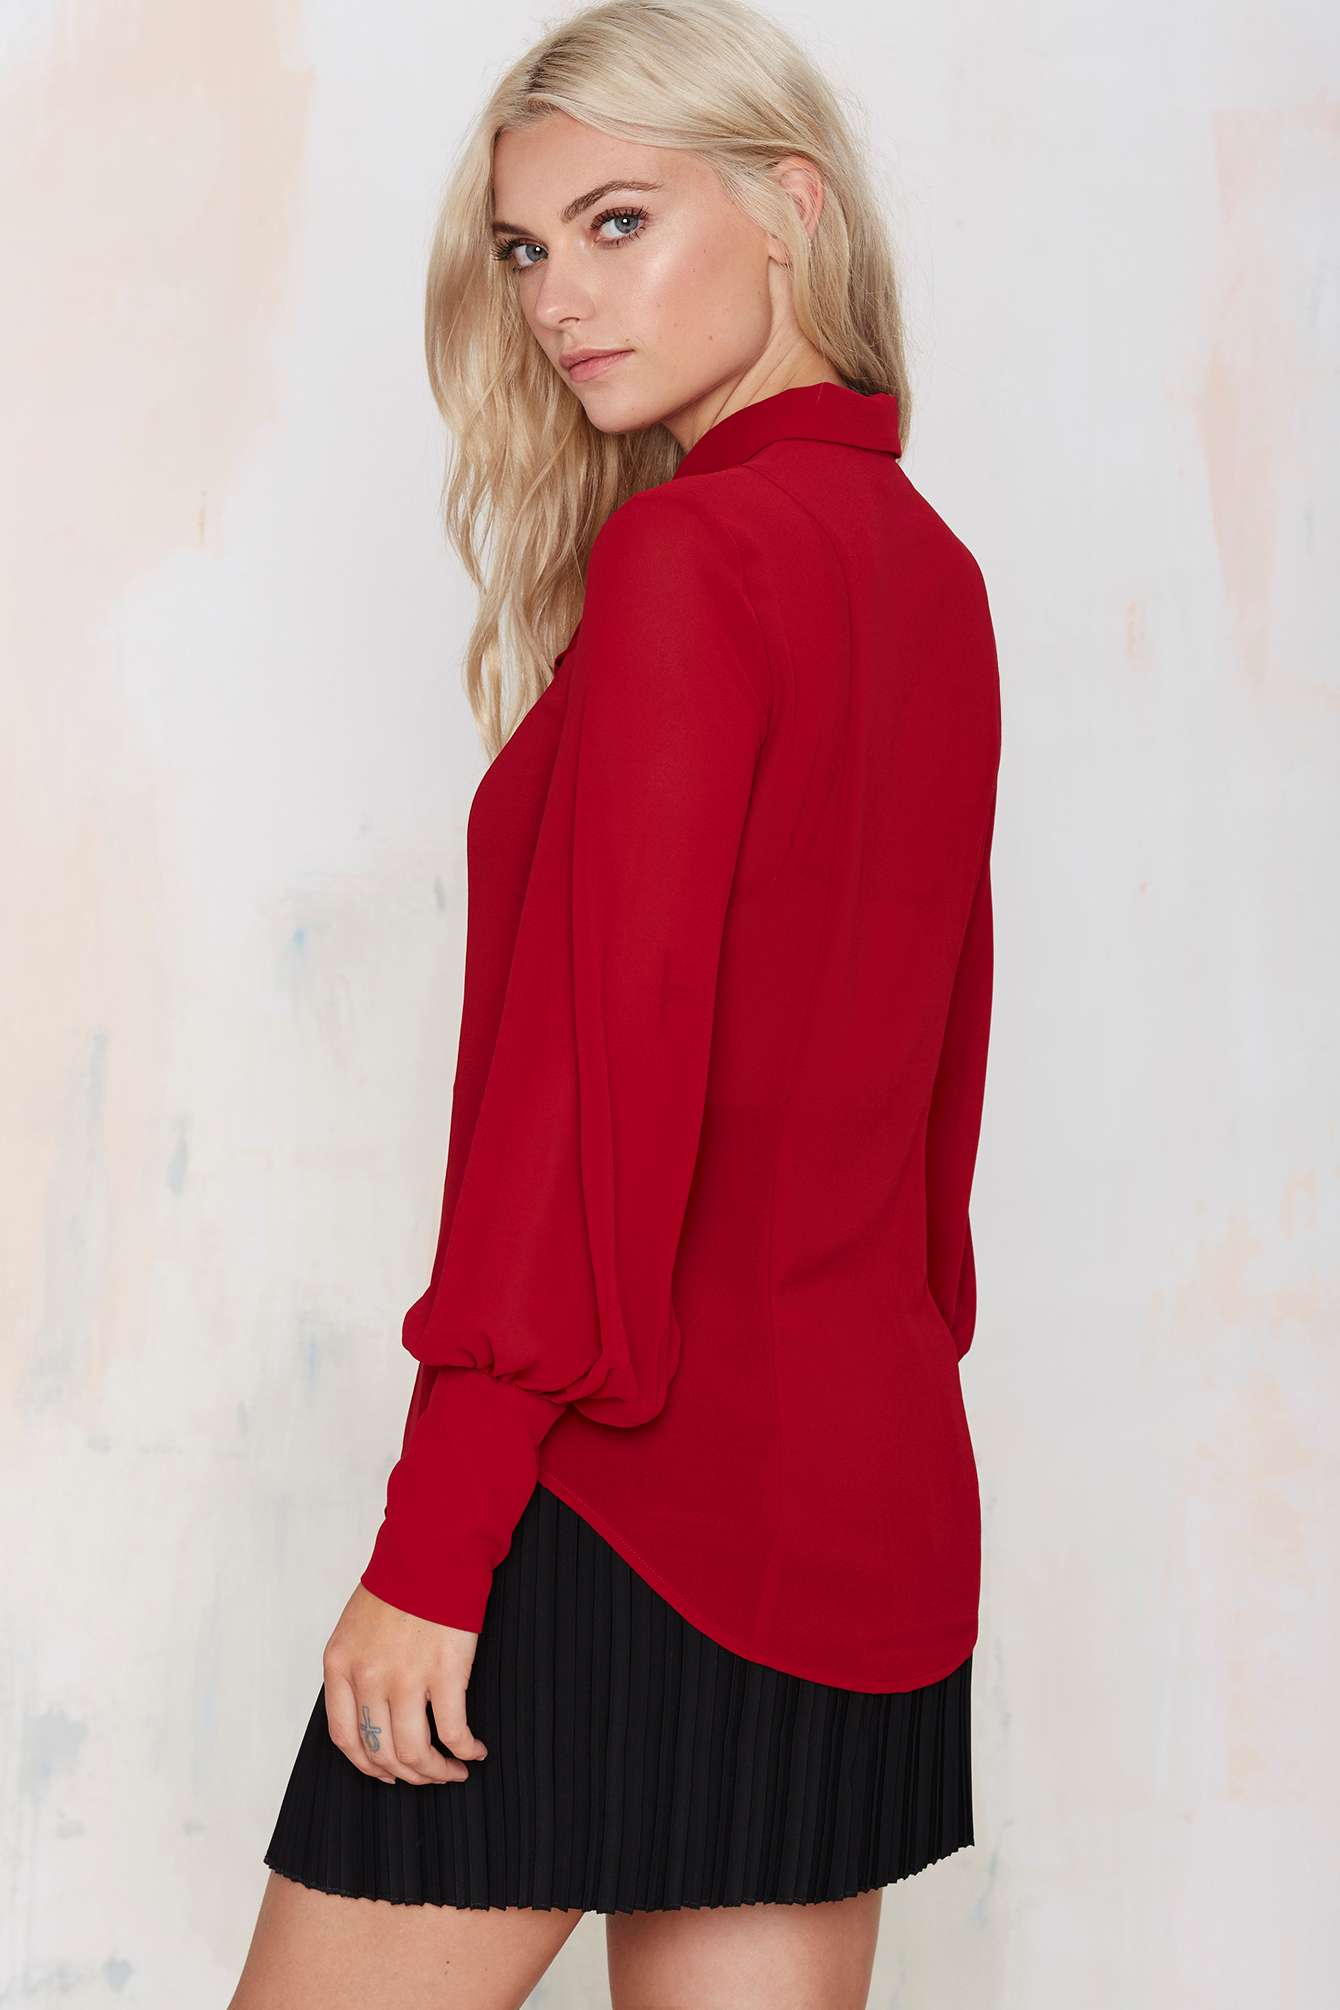 Nasty Gal | Mademoiselle Pussy Bow Blouse | Women's blouses & shirts ...